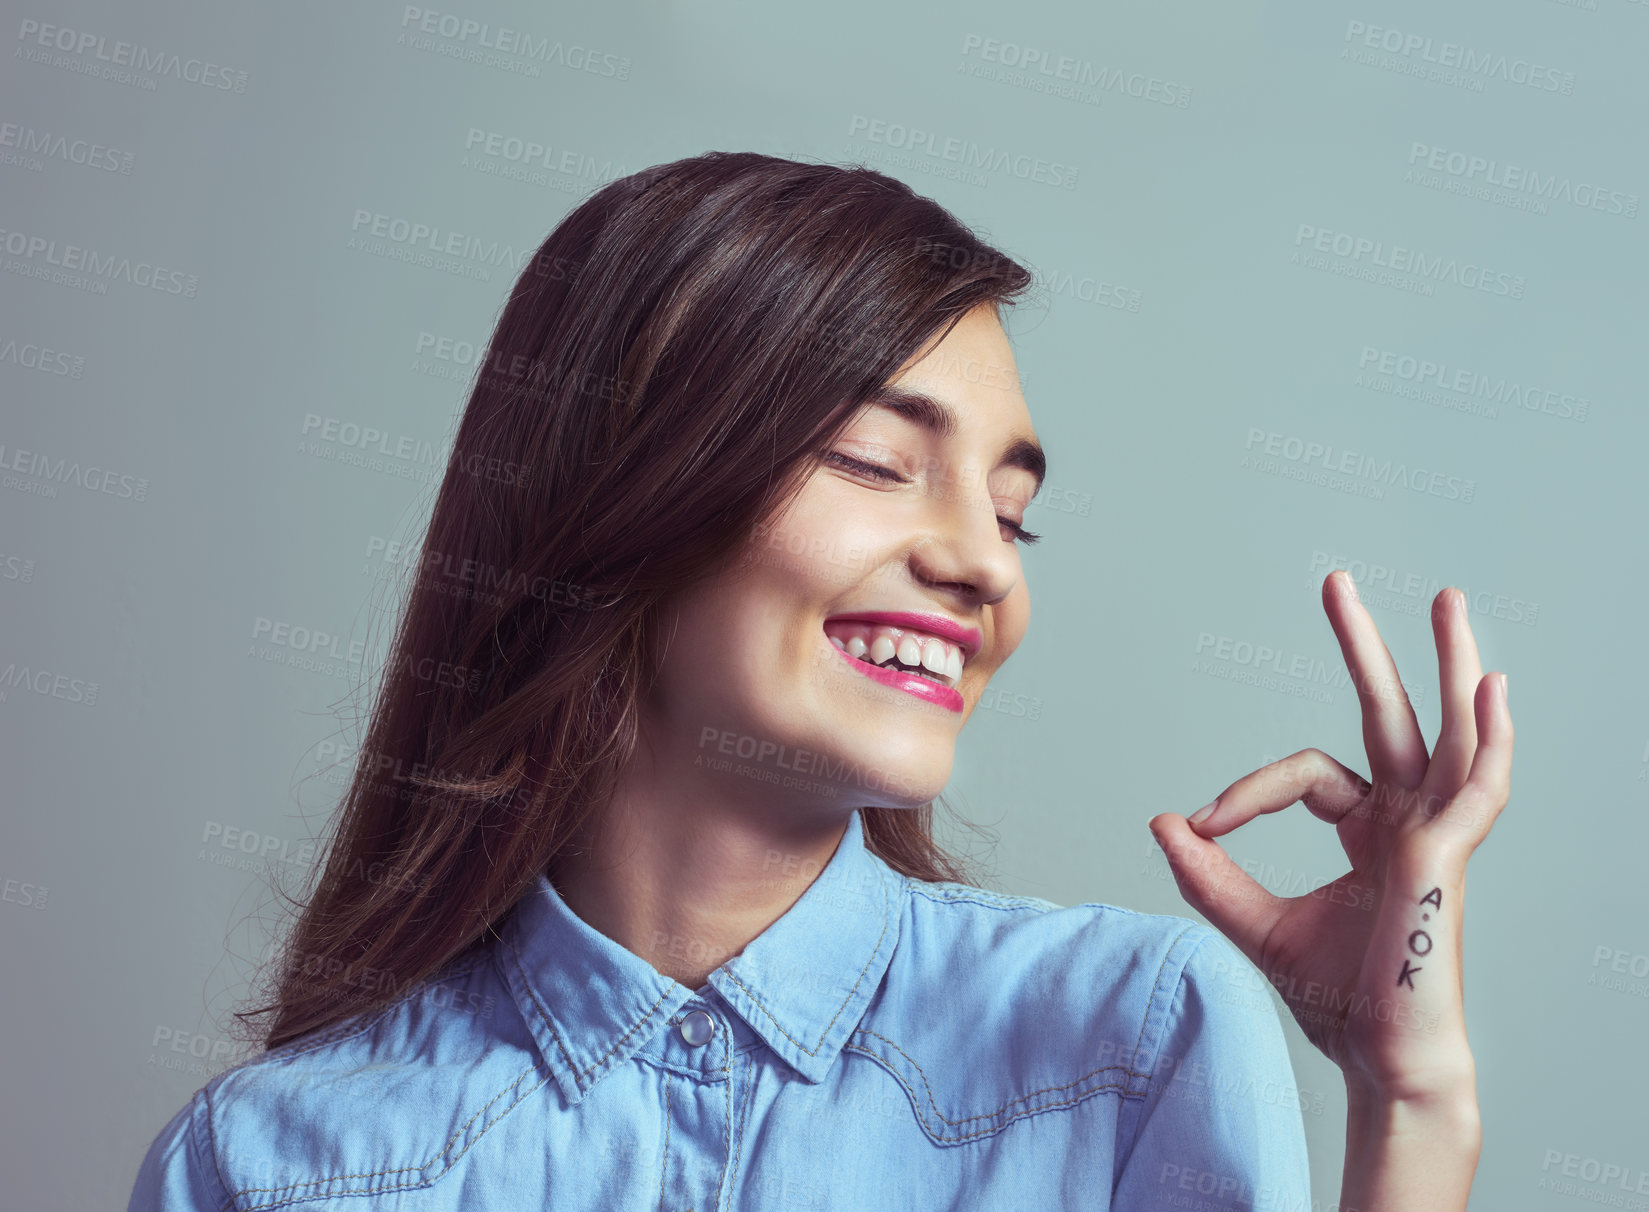 Buy stock photo Studio shot of an attractive young woman making an 